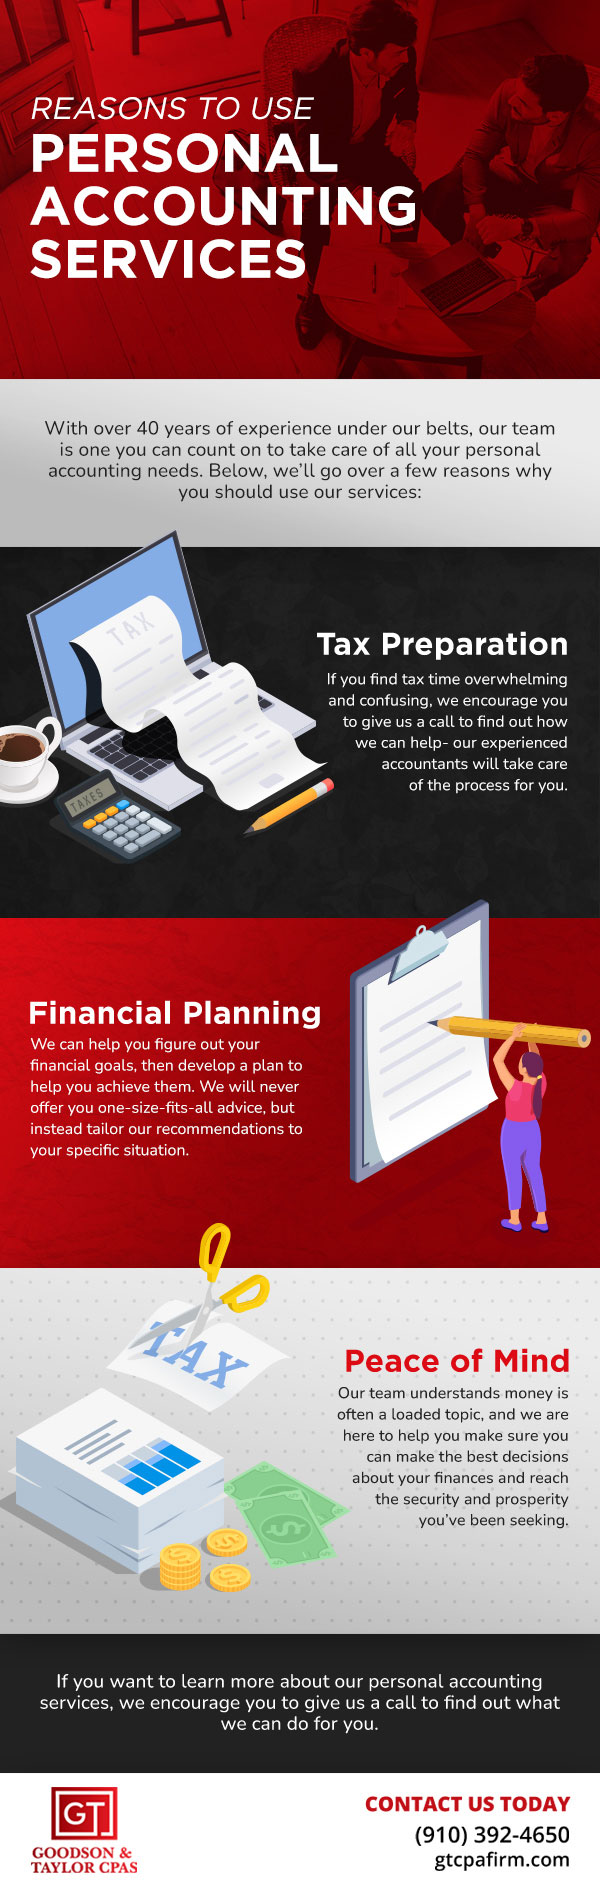 Reasons to Use Personal Accounting Services